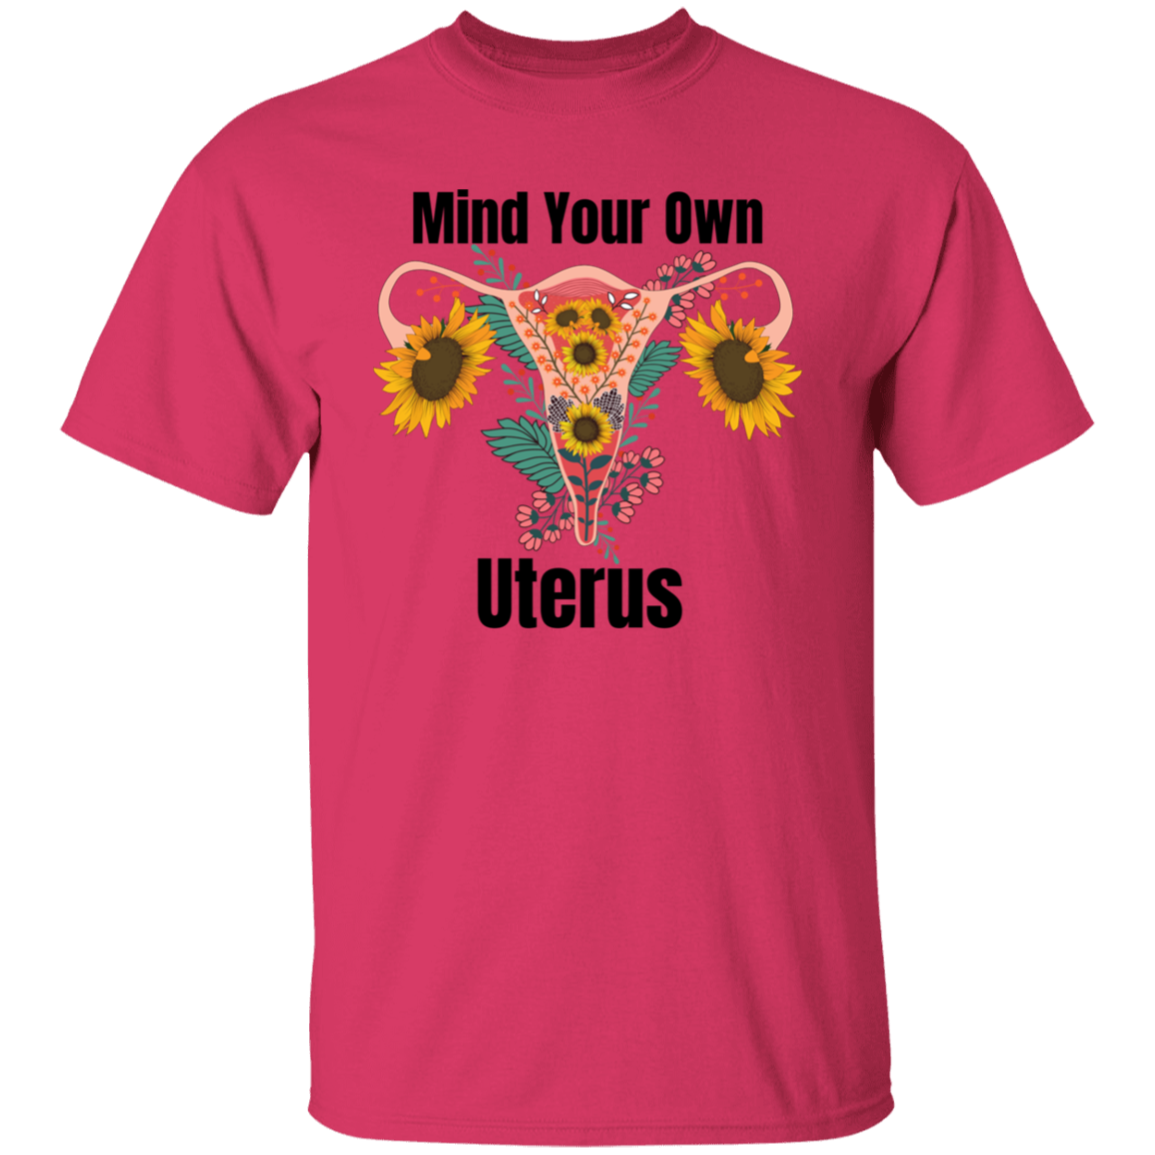 Unisex Mind Your Own Uterus Shirt, Reproductive Rights Tee, Women's Rights Top